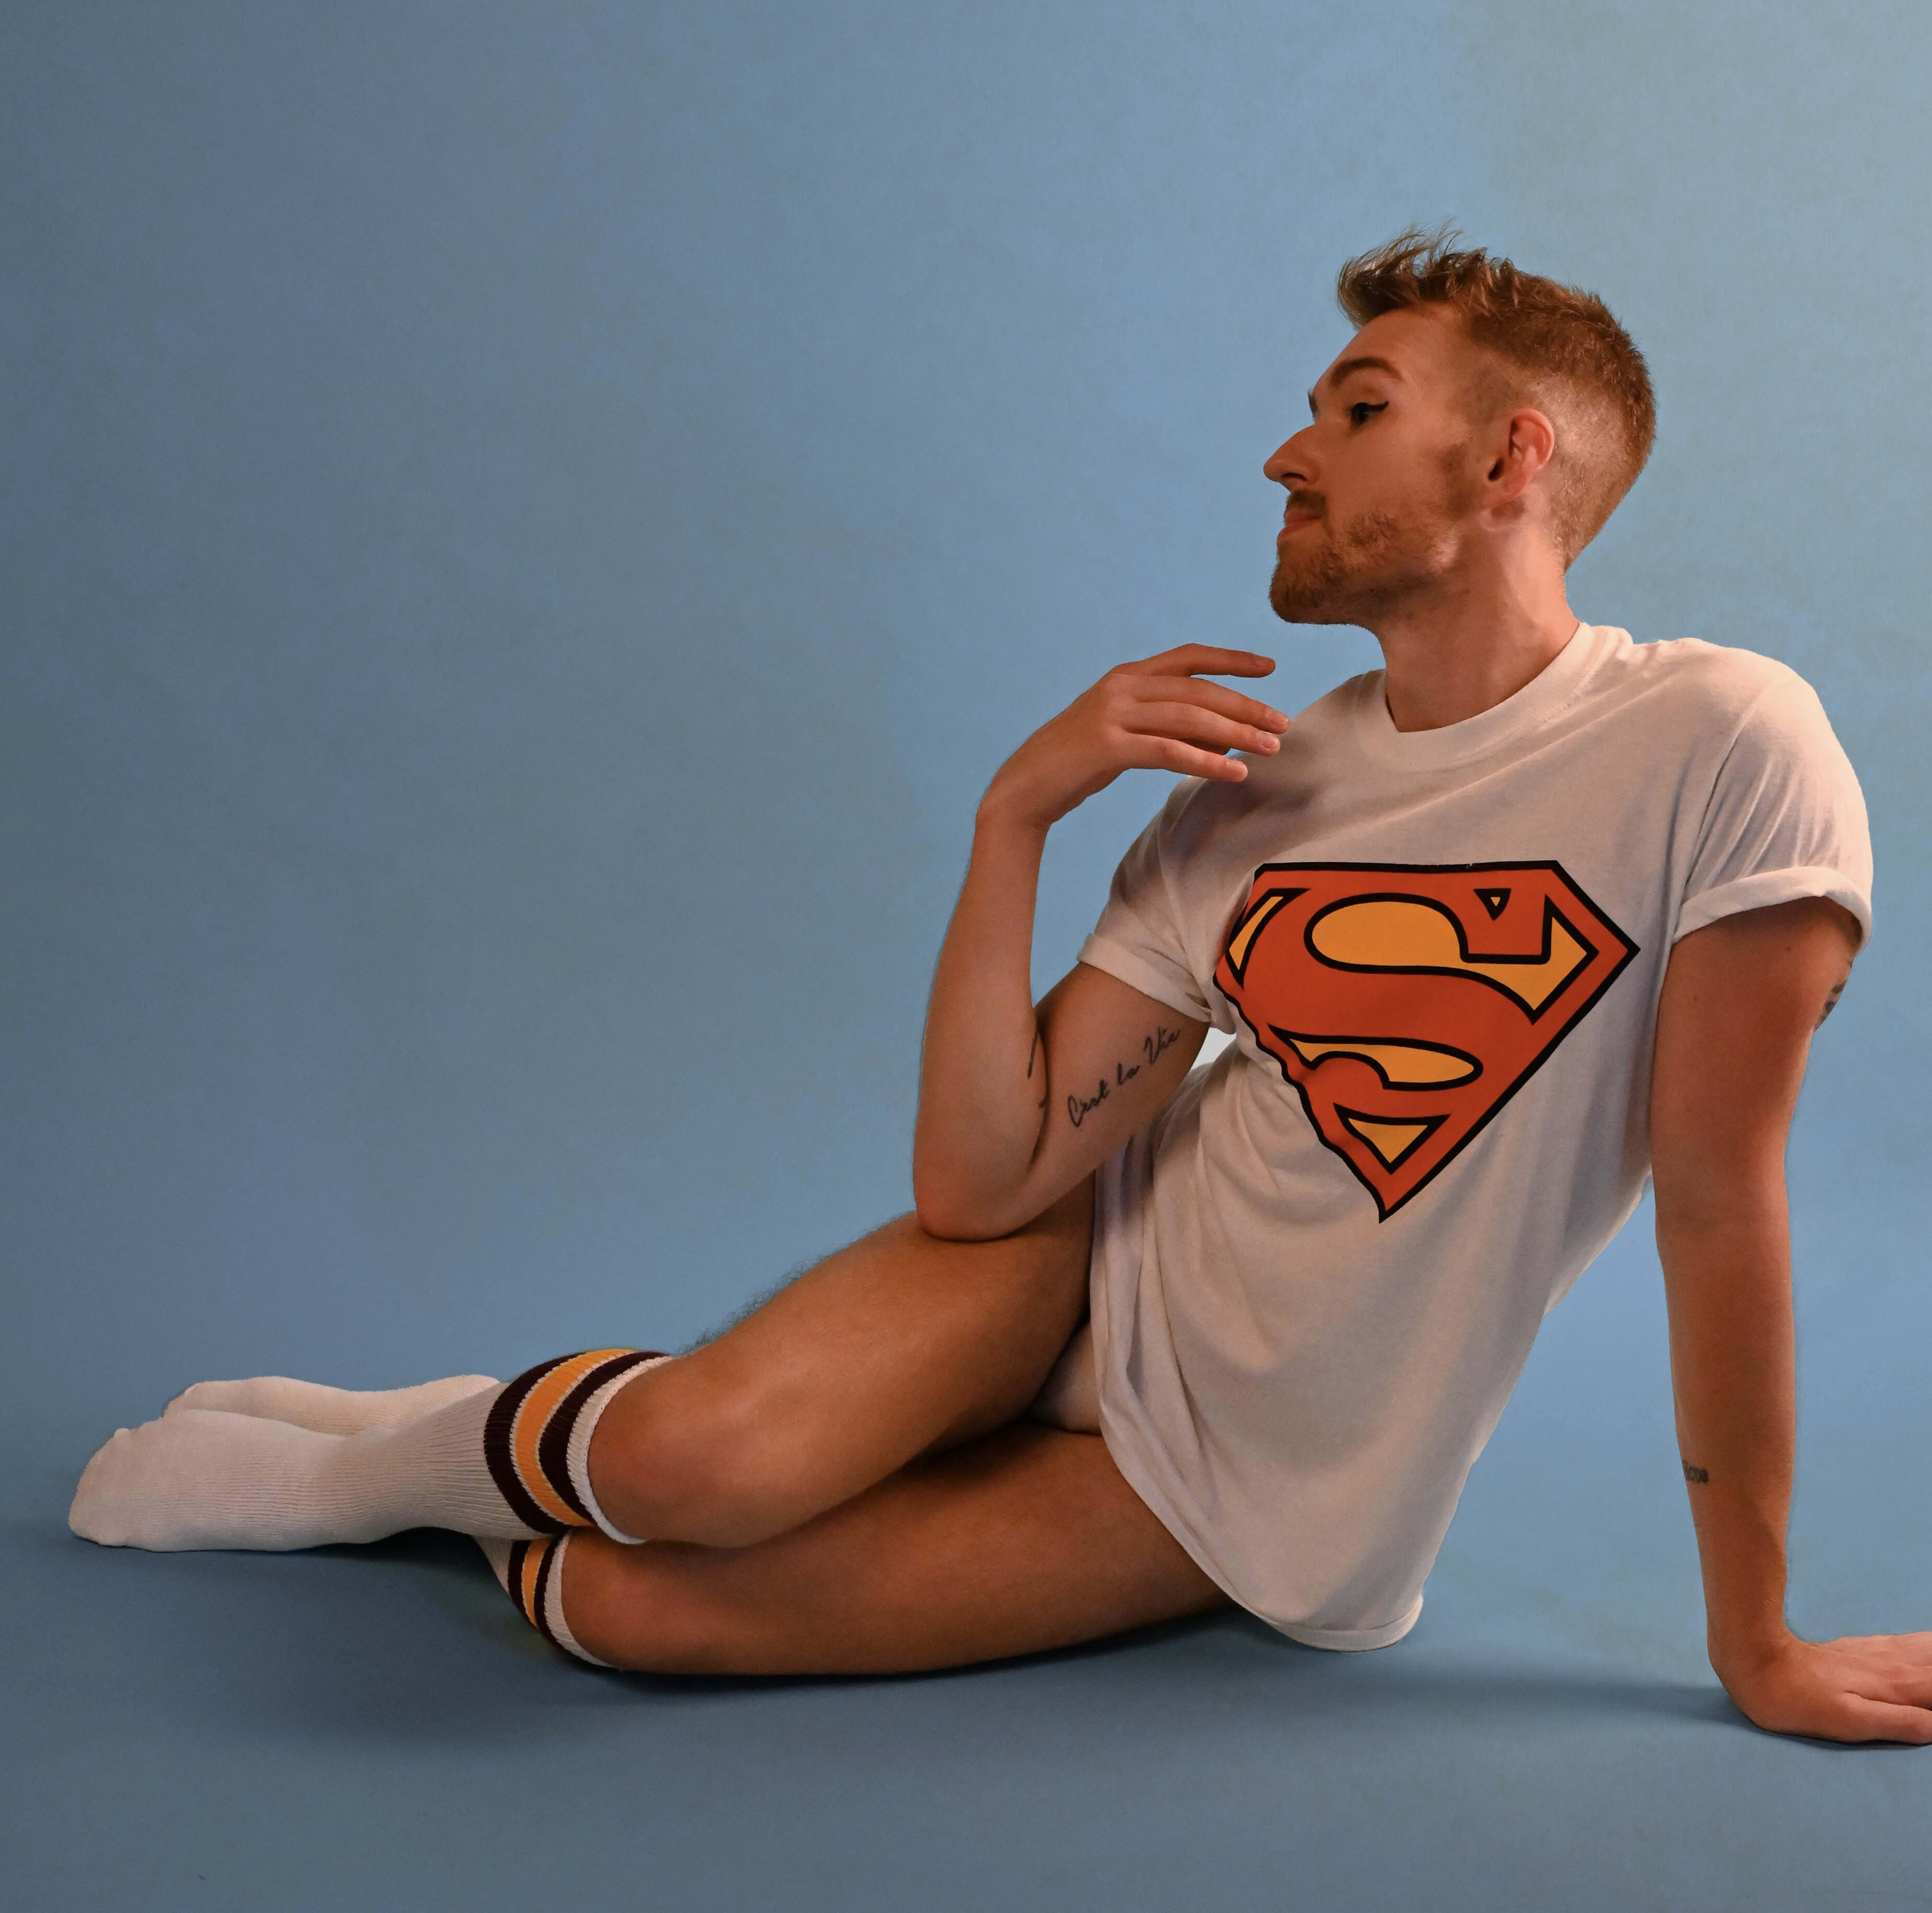 A man with a Superman t-shirt sitting on the ground for a photoshoot.